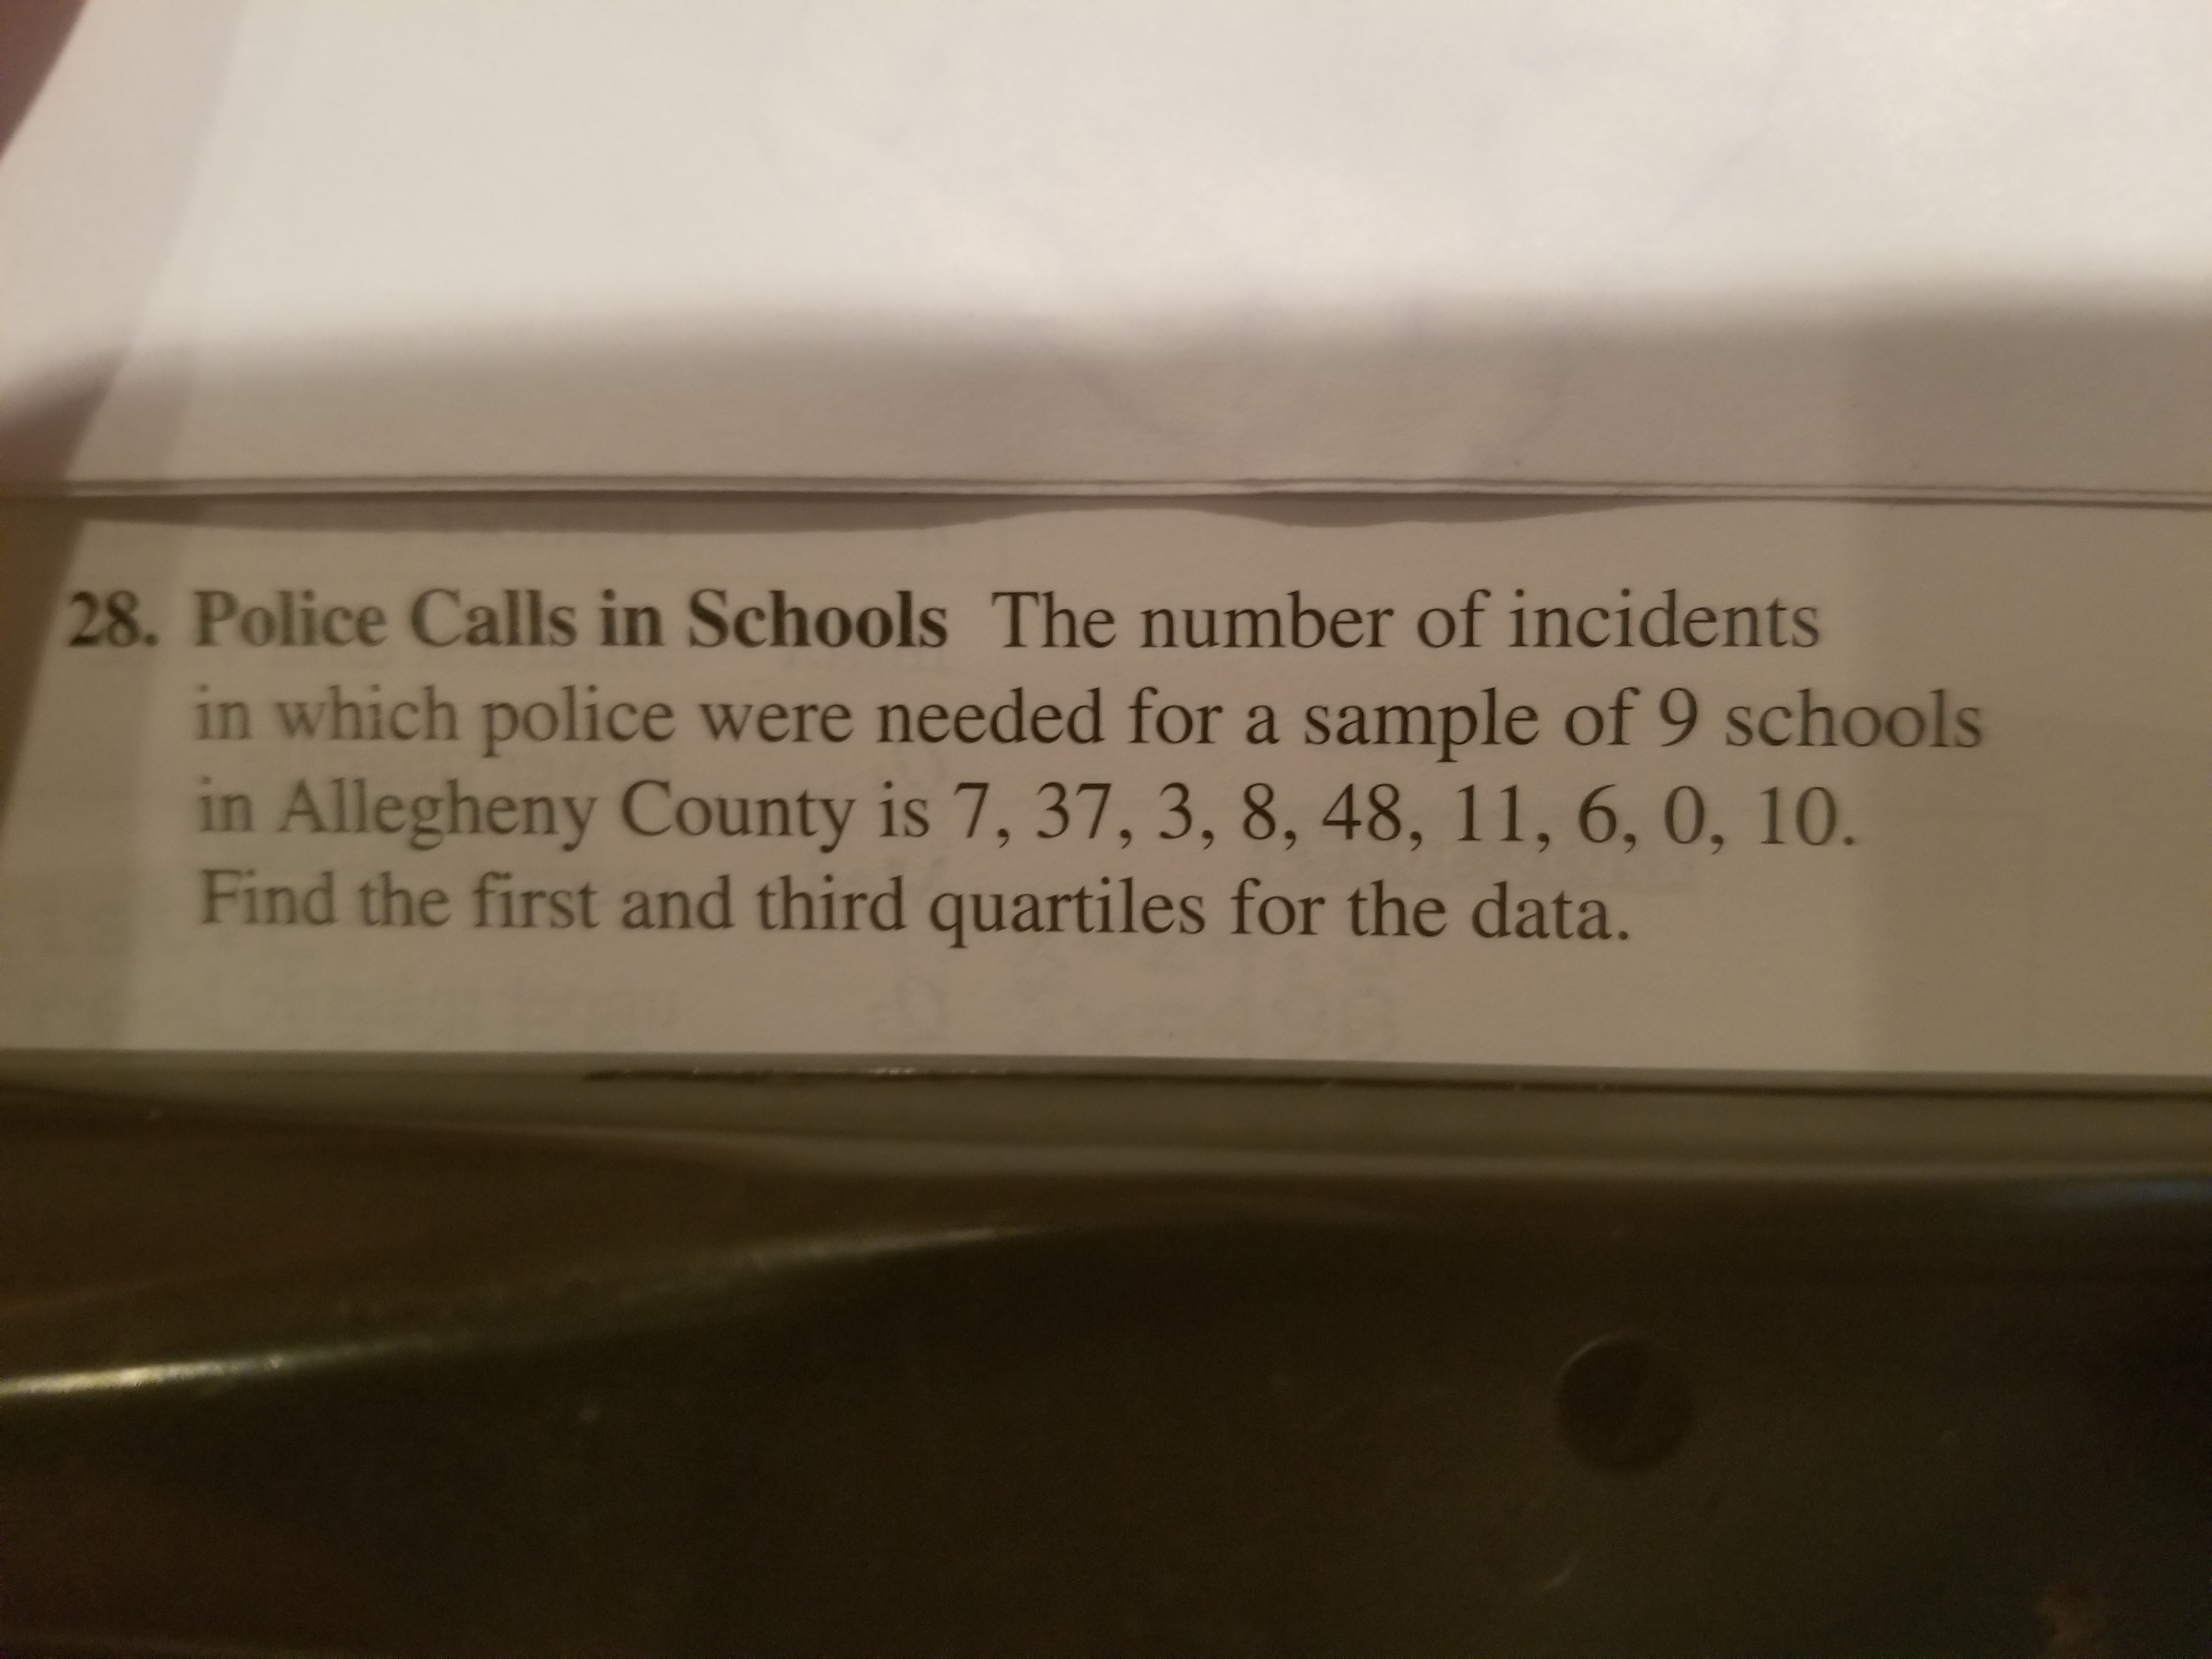 28. Police Calls in Schools The number of incidents
in which police were needed for a sample of 9 schools
in Allegheny County is 7, 37, 3, 8, 48, 11, 6, 0, 10.
Find the first and third quartiles for the data.
